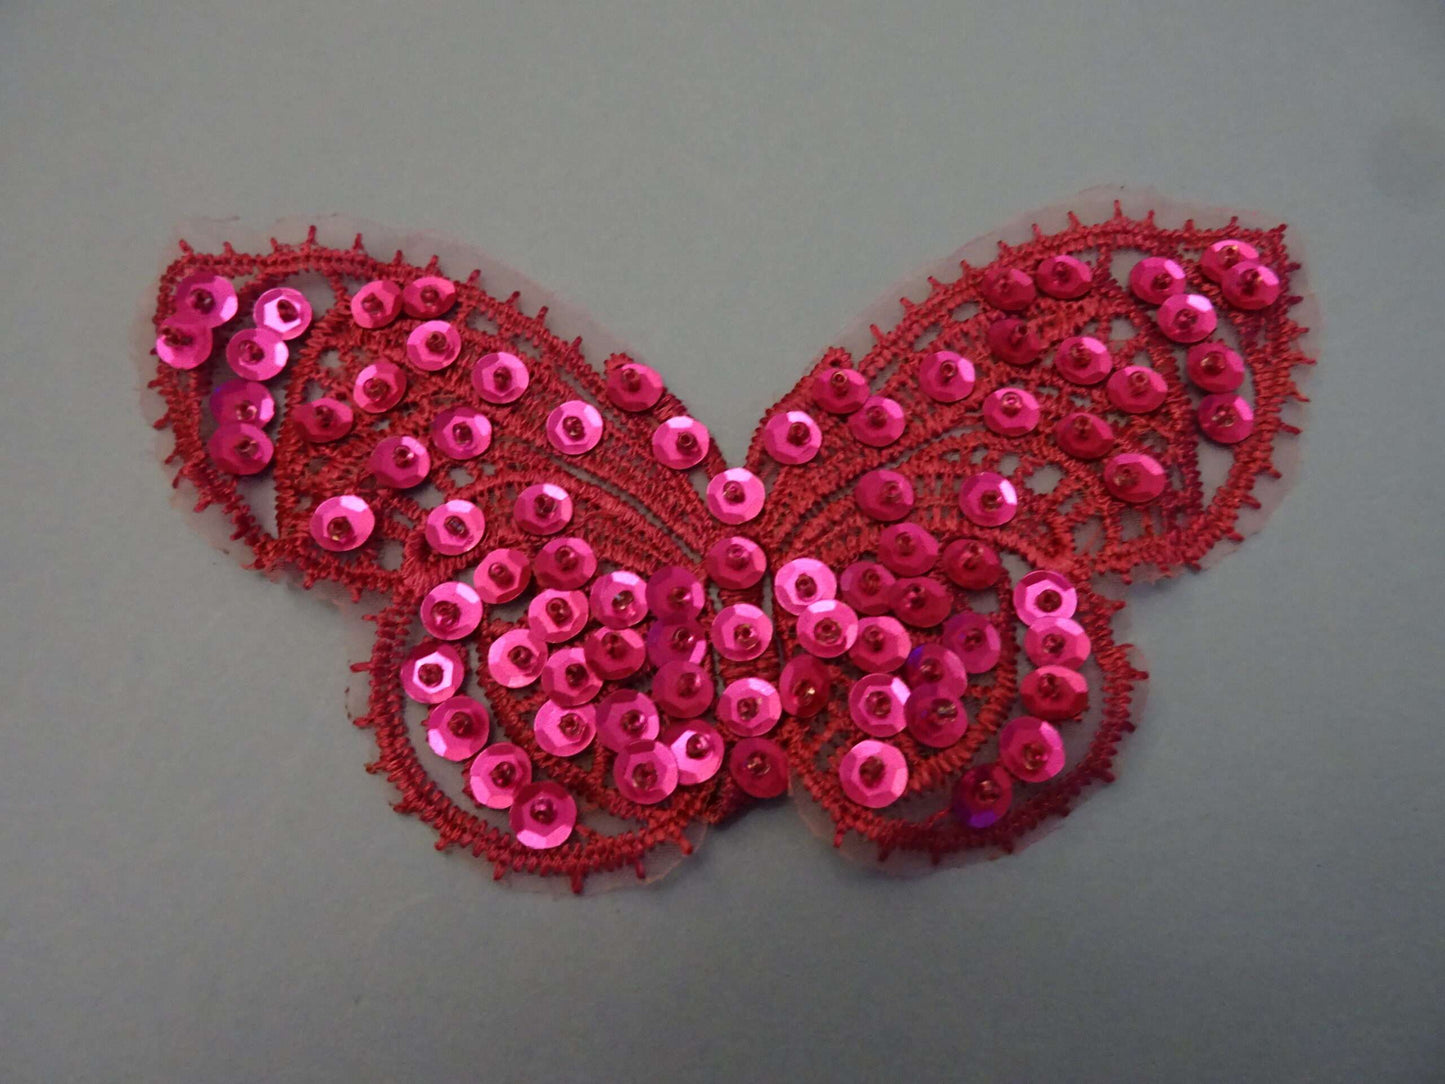 5 Cerise butterfly motifs with beads and sequins 8cm x 14cm clearance